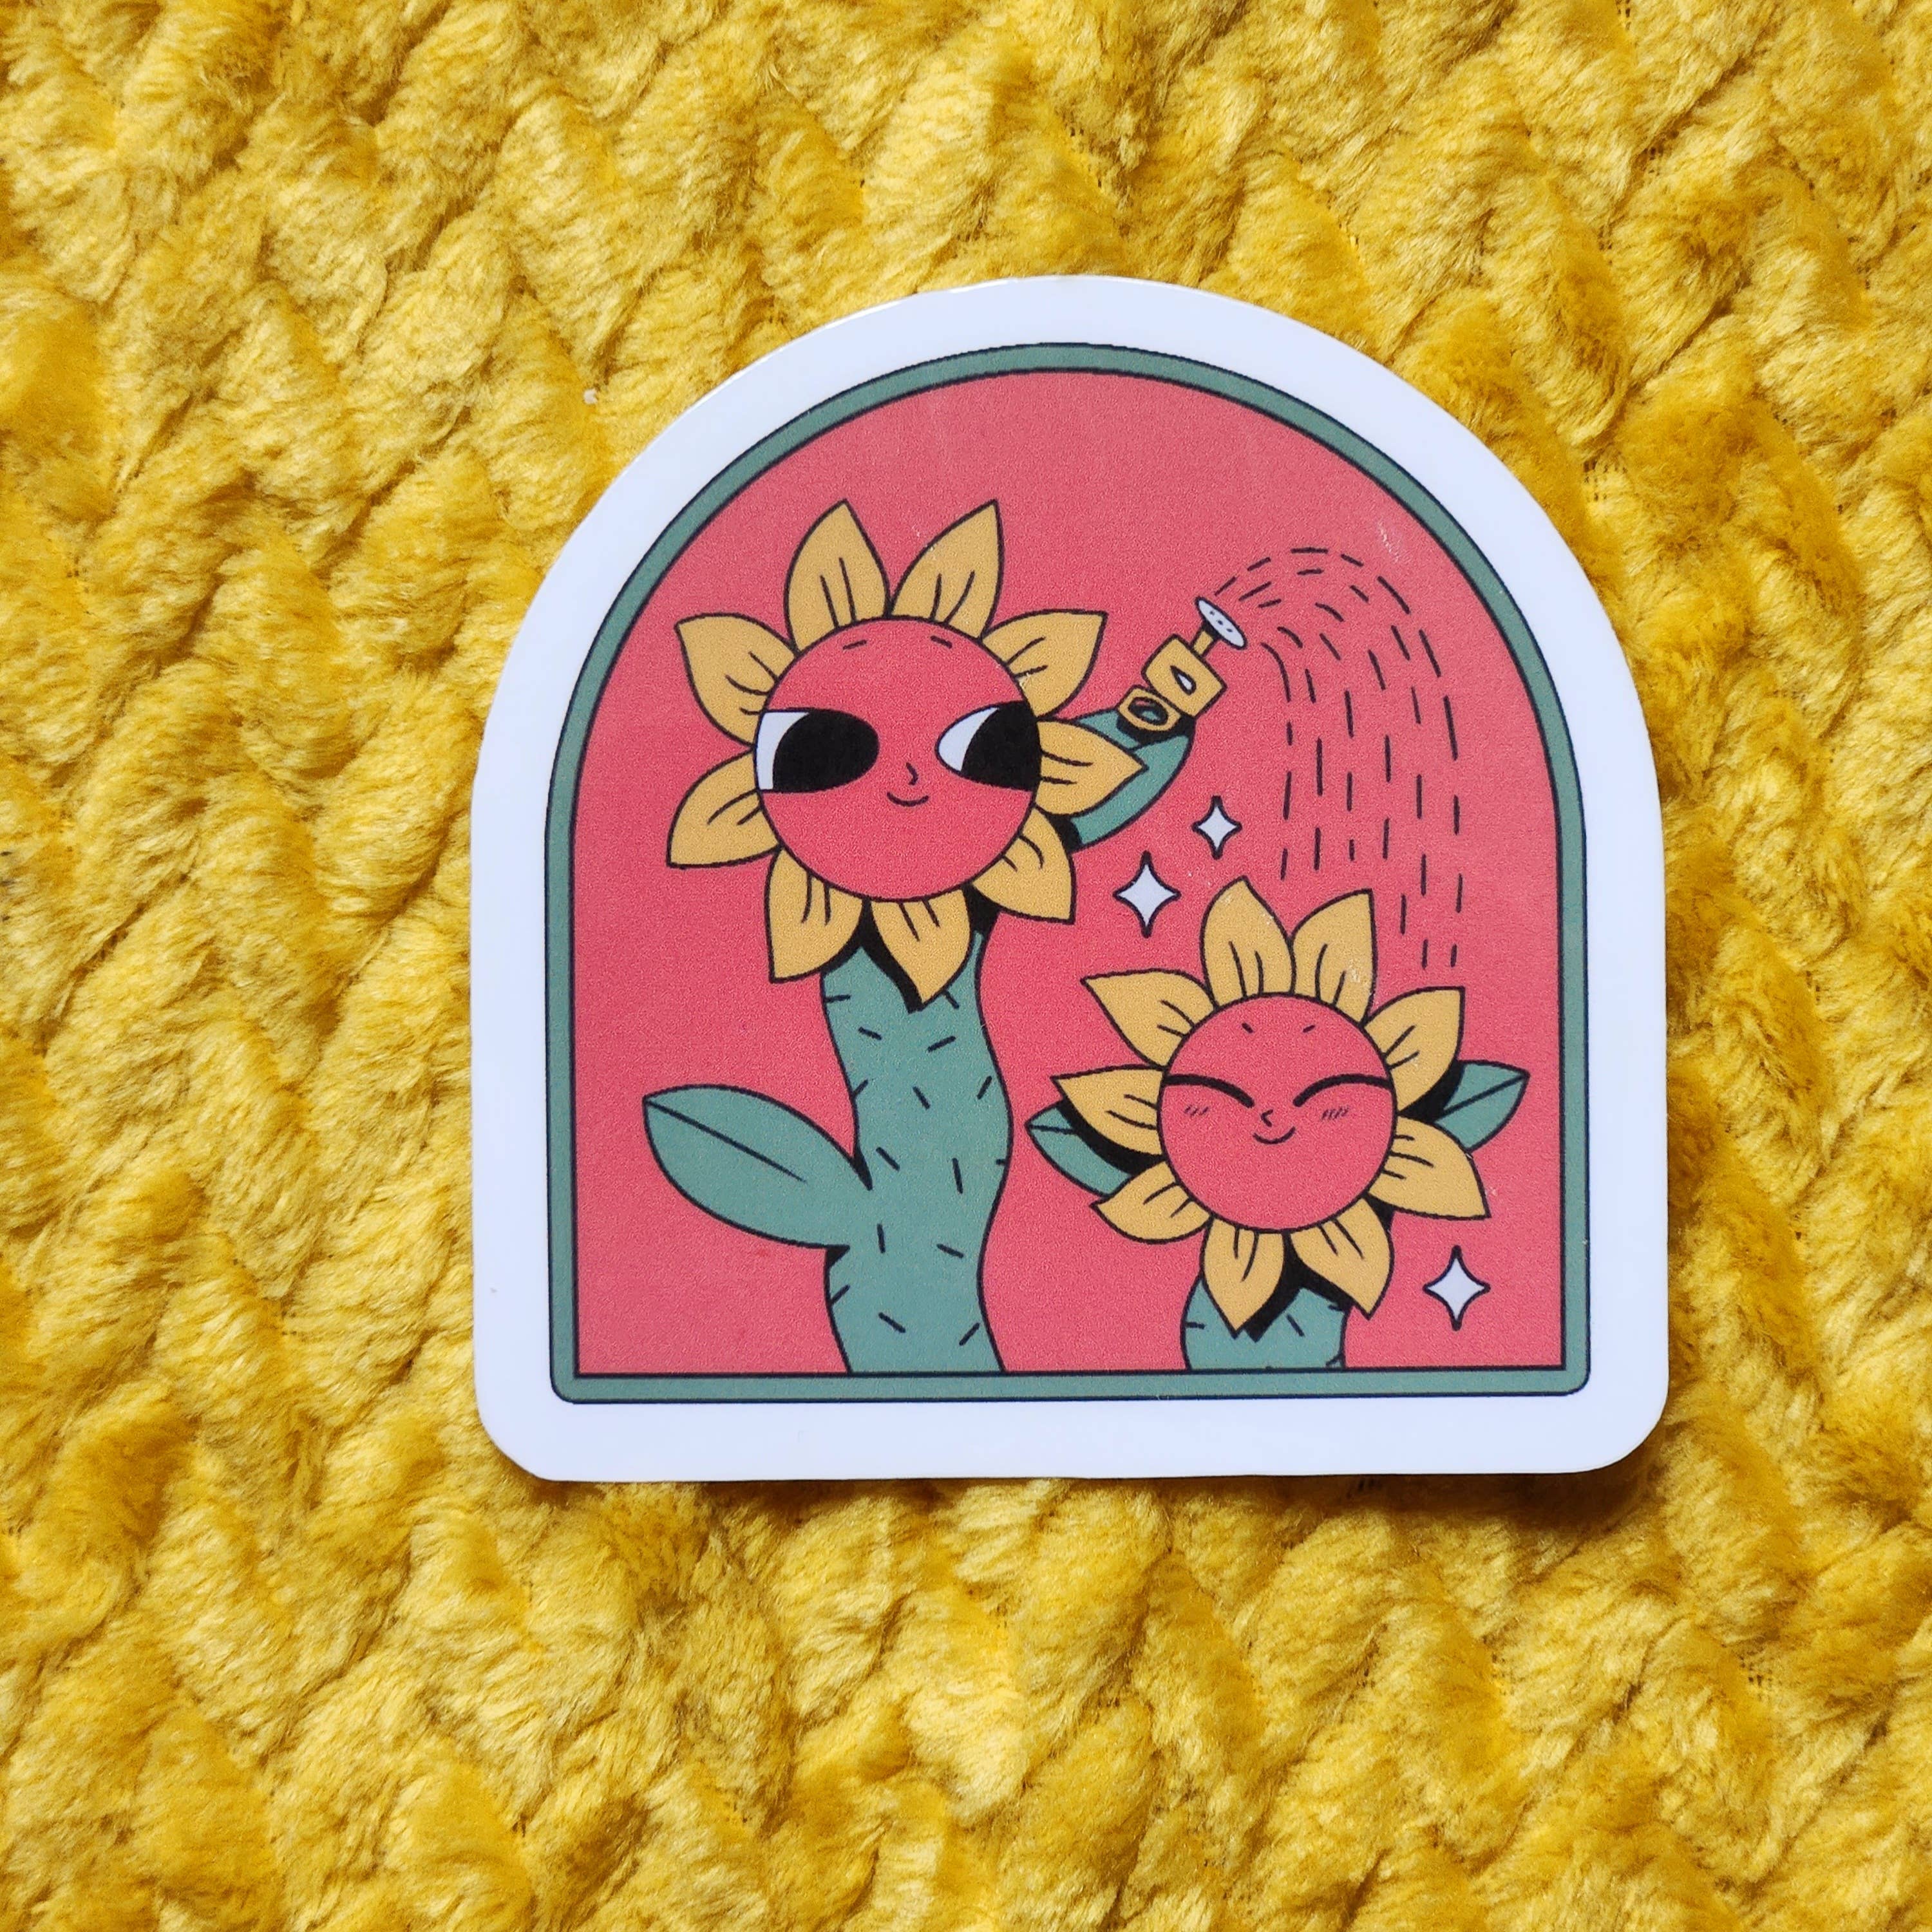 Retro Flowers Sticker - Out of the Blue